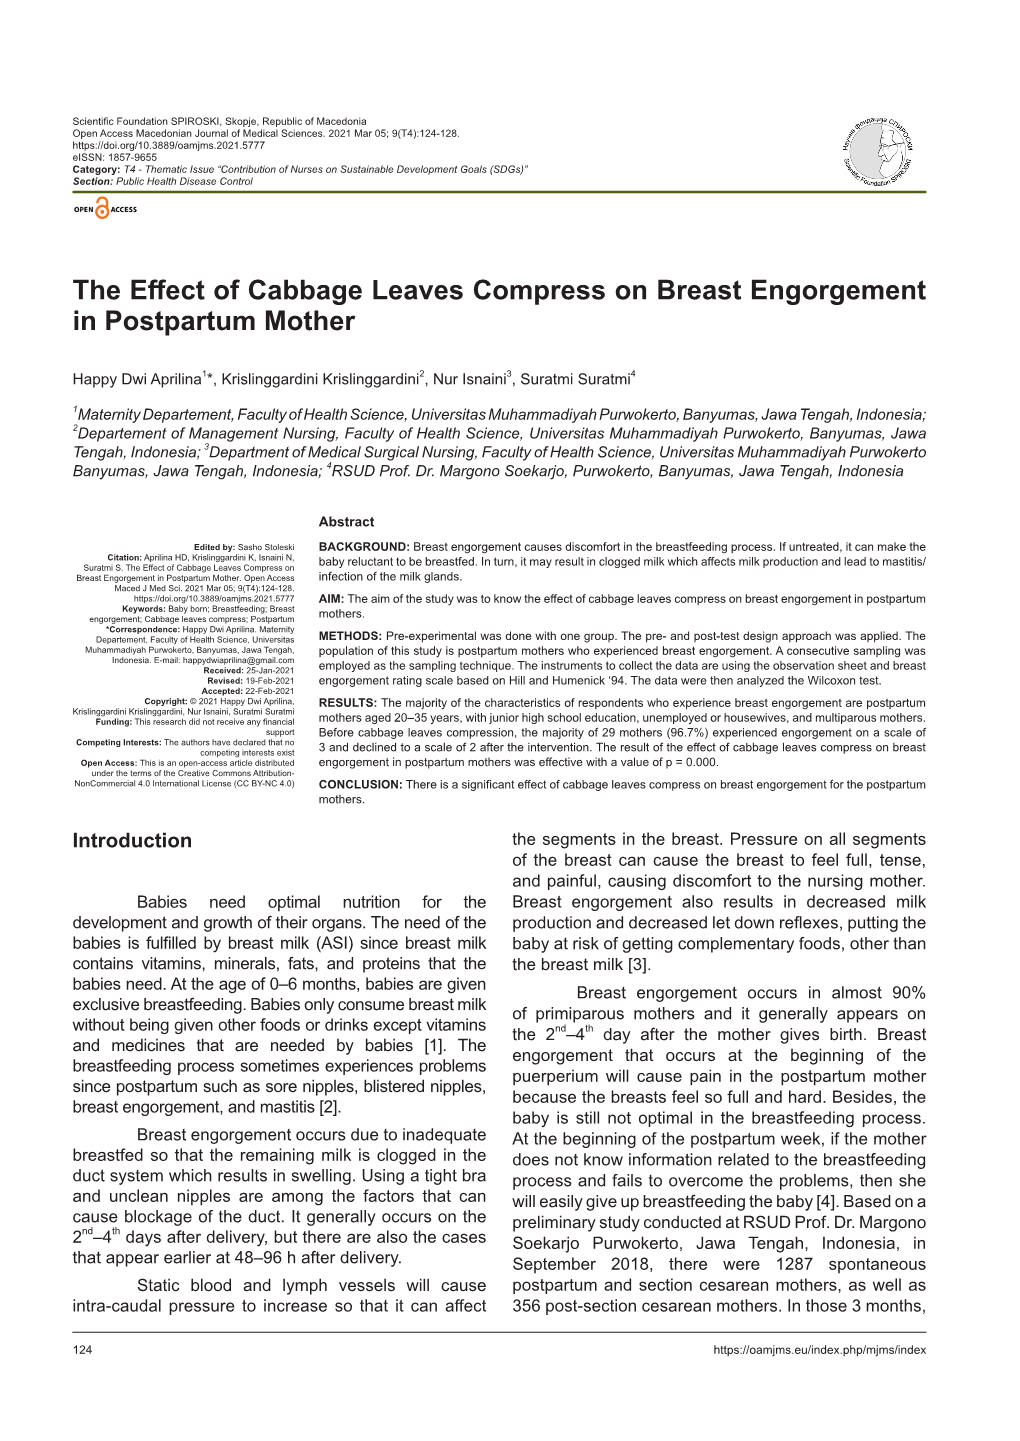 The Effect of Cabbage Leaves Compress on Breast Engorgement in Postpartum Mother